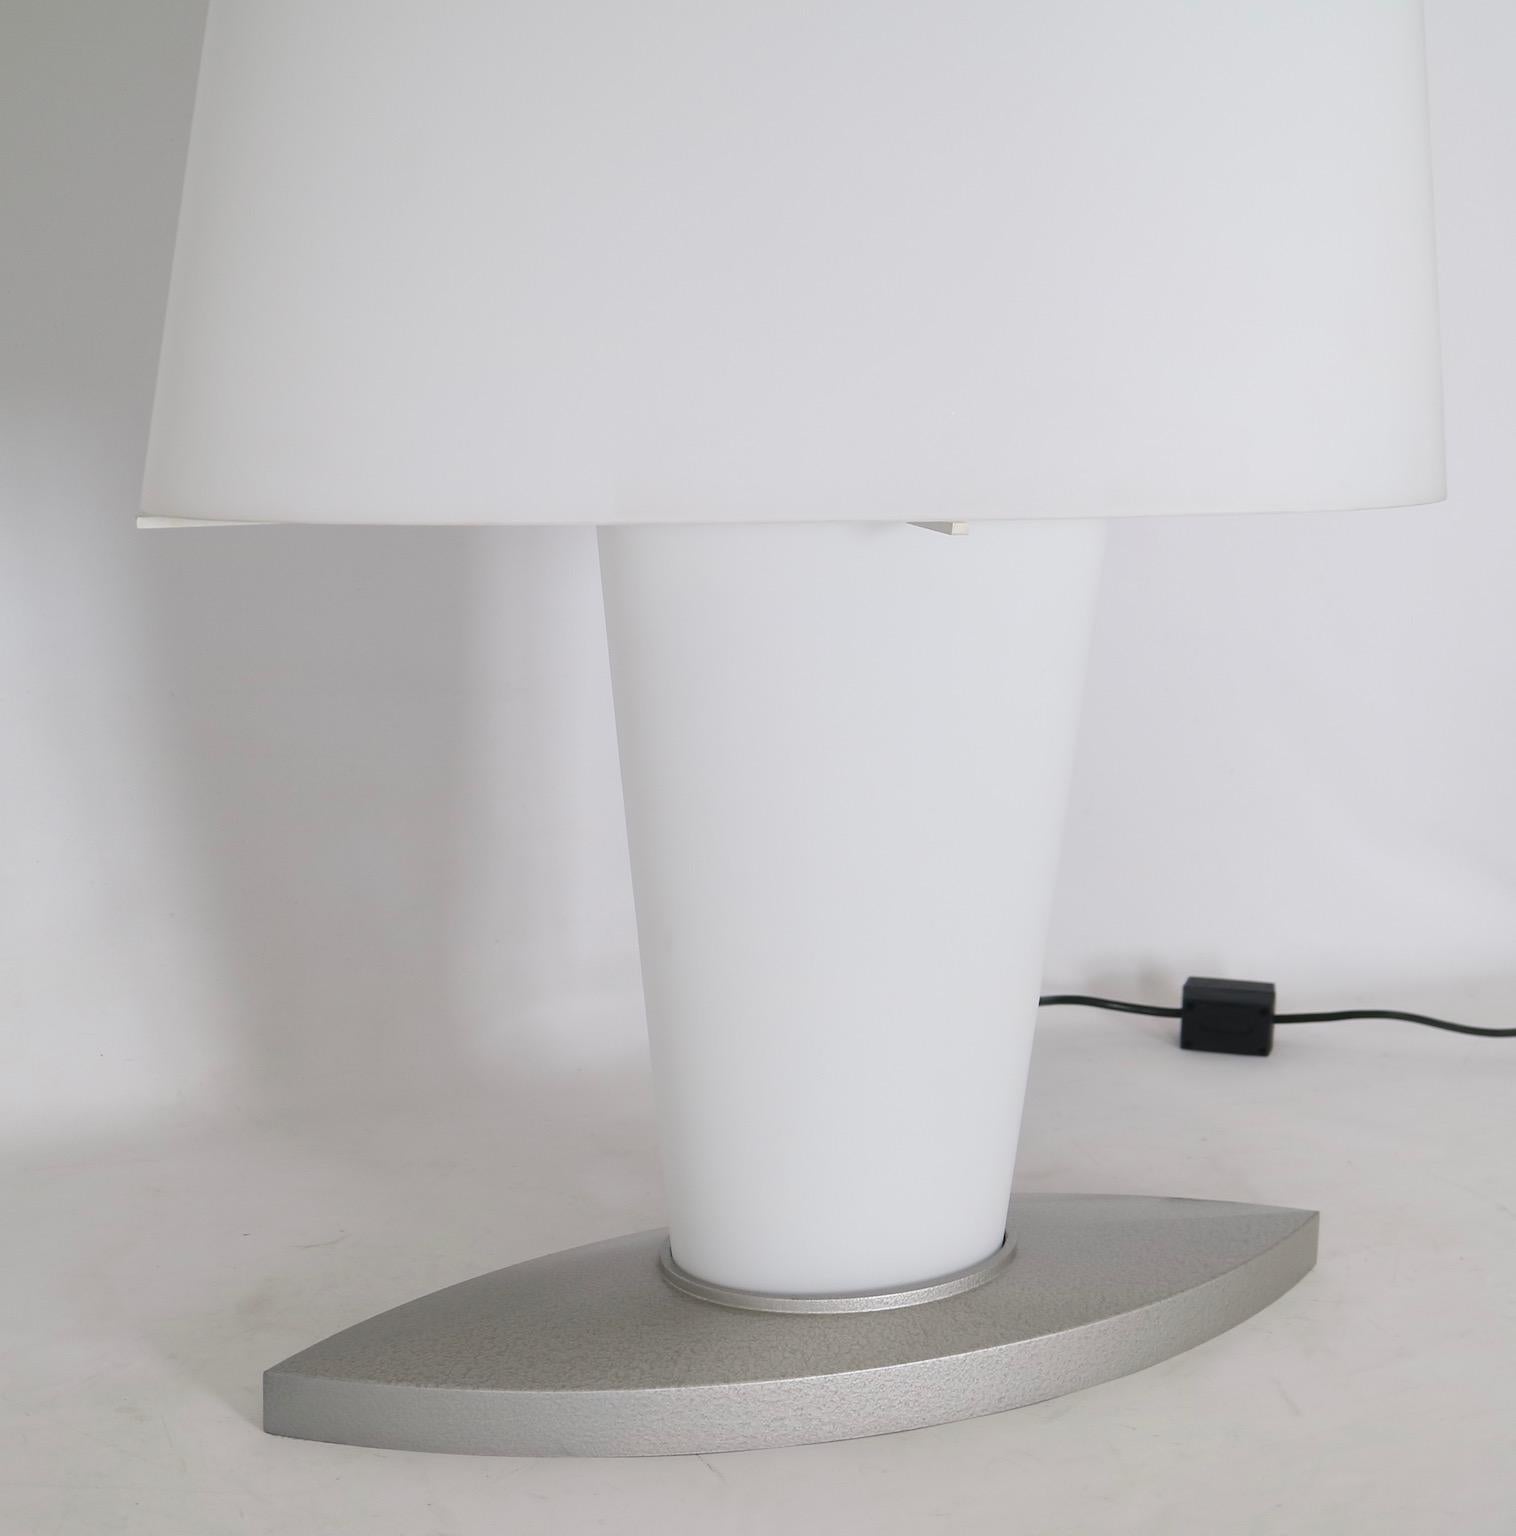 Monumental Daniela Puppa Fontana Arte double switched table lamp in frosted white glass. Designed in 1991, this lamp allows for one to light the top diffuser, bottom diffuser or both simultaneously. The lamp is oblong in shape which is accented by